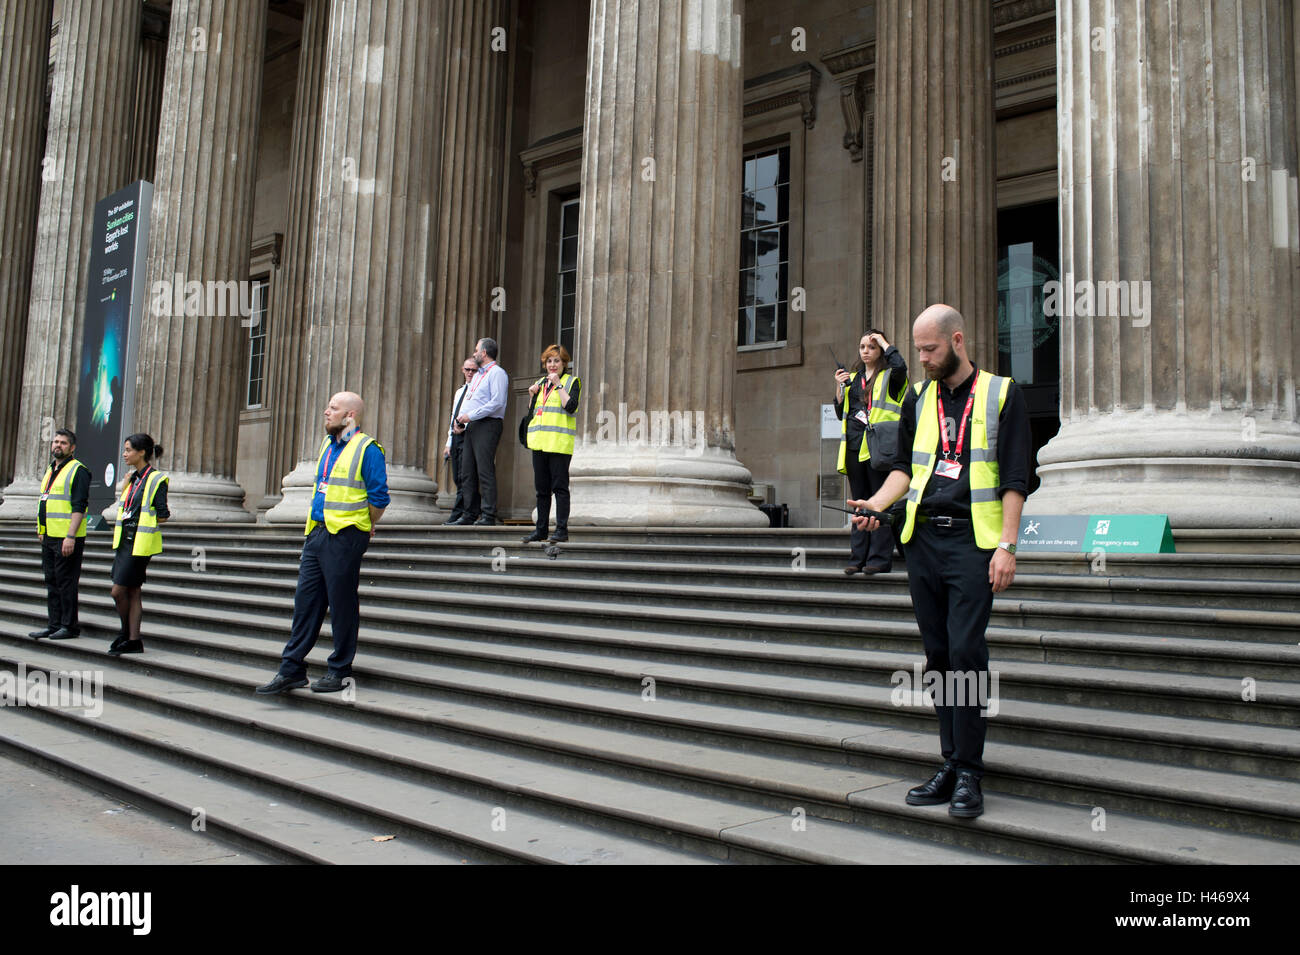 British Museum - security . Museum workers wait on the steps after a security alert and evacuation of the museum. Stock Photo